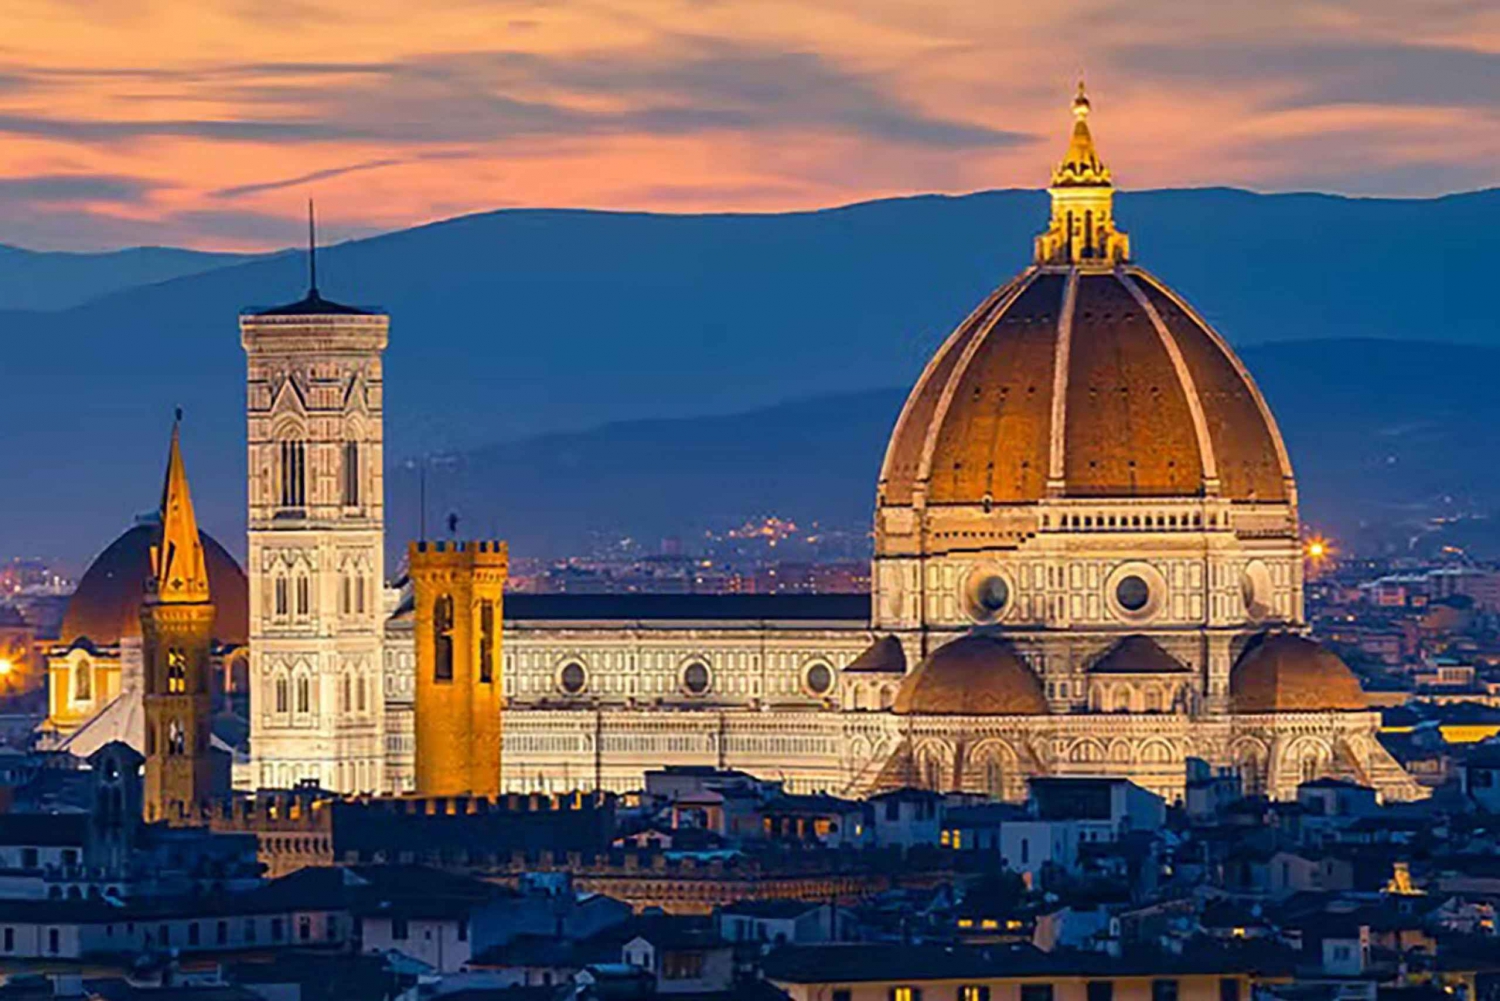 Visit the iconic Florence Duomo